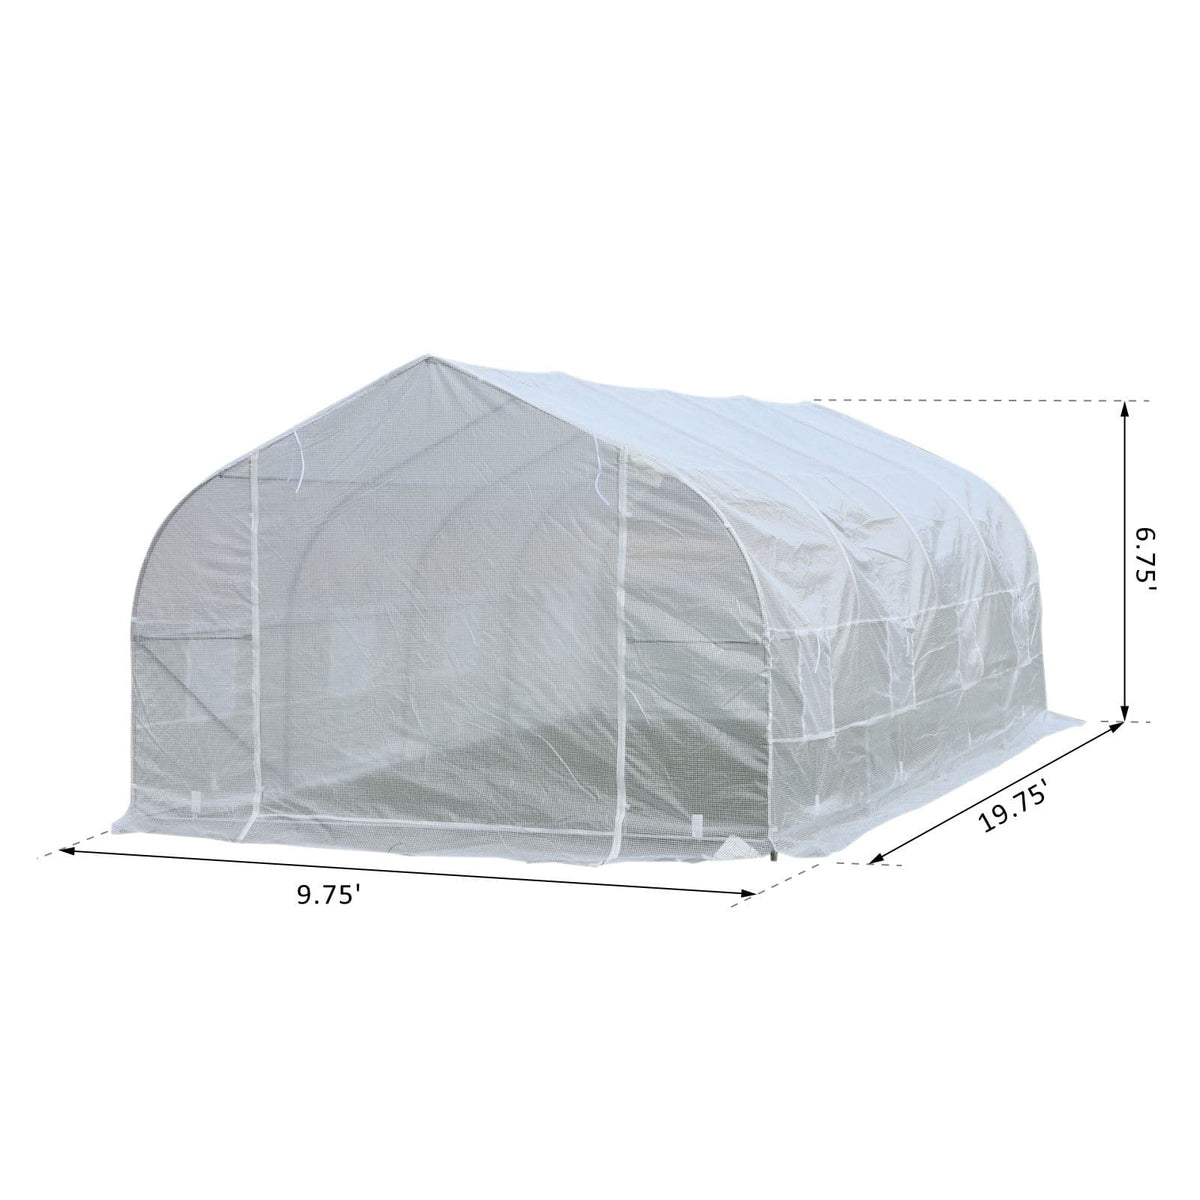 A diagram displaying the measurements of an Aosom Outsunny 20&#39; x 10&#39; x 7&#39; Deluxe High Tunnel Walk-in Garden Greenhouse Kit - White, specifically designed for growing plants and crops.